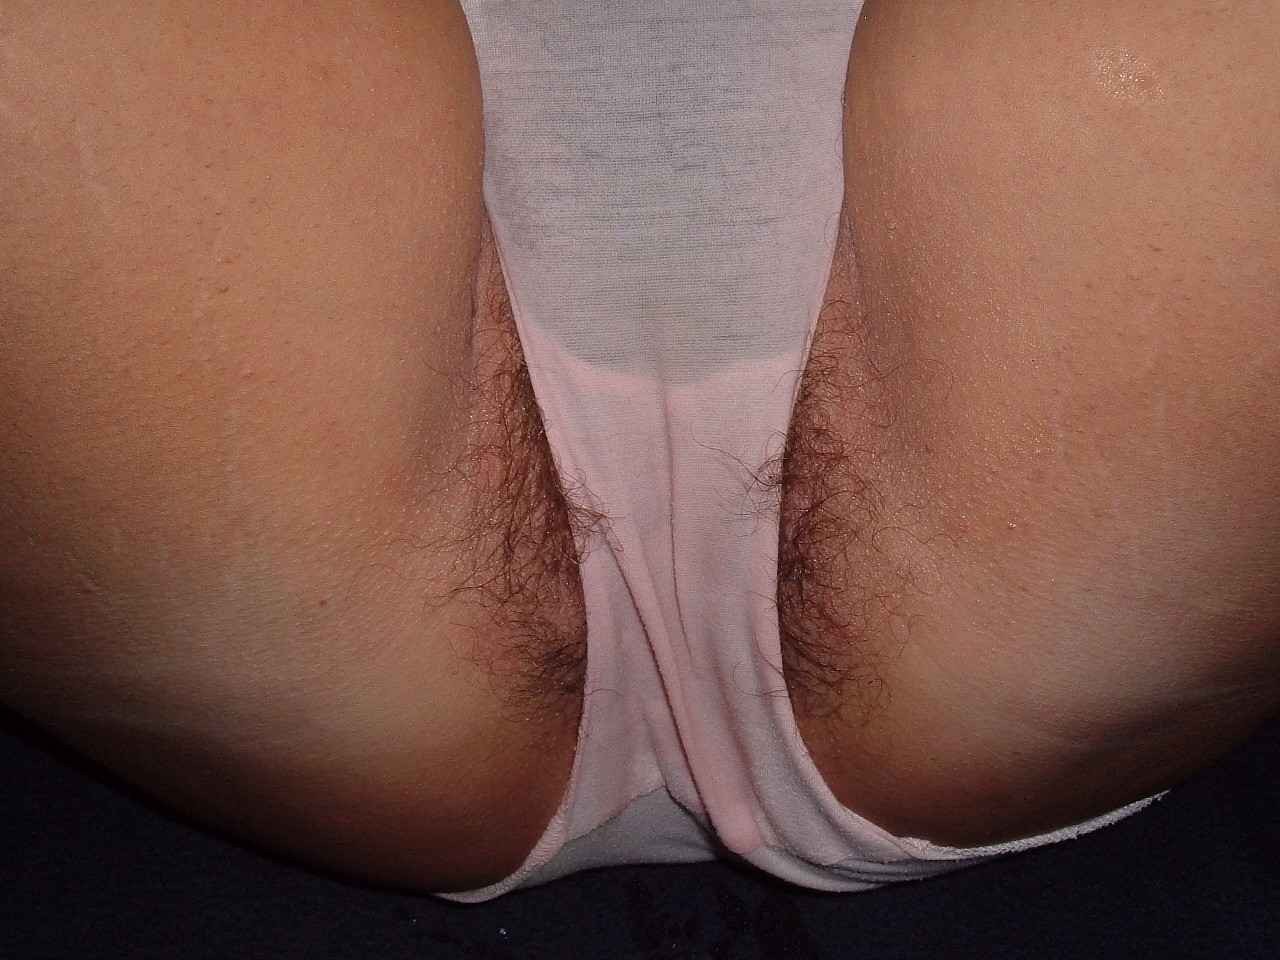 Keyhole panties come show pussy